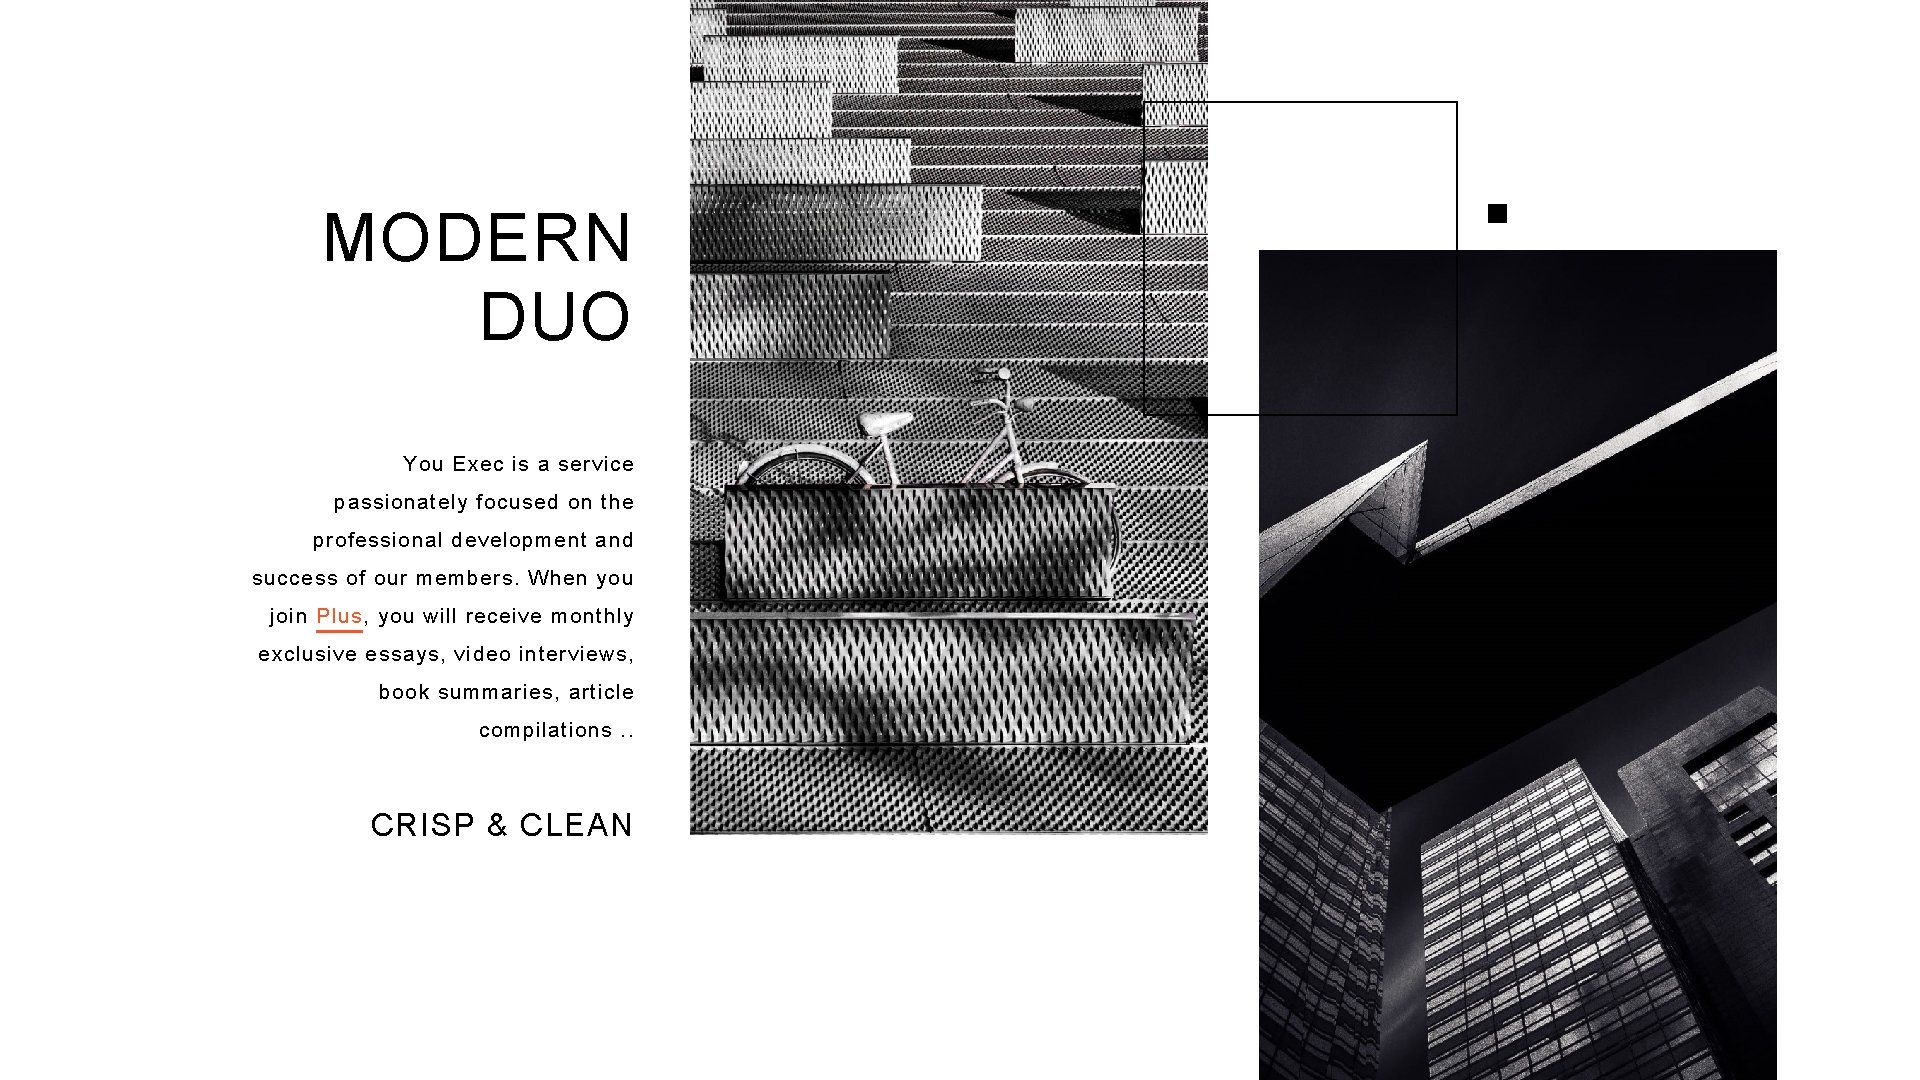 MODERN DUO You Exec is a service passionately focused on the professional development and